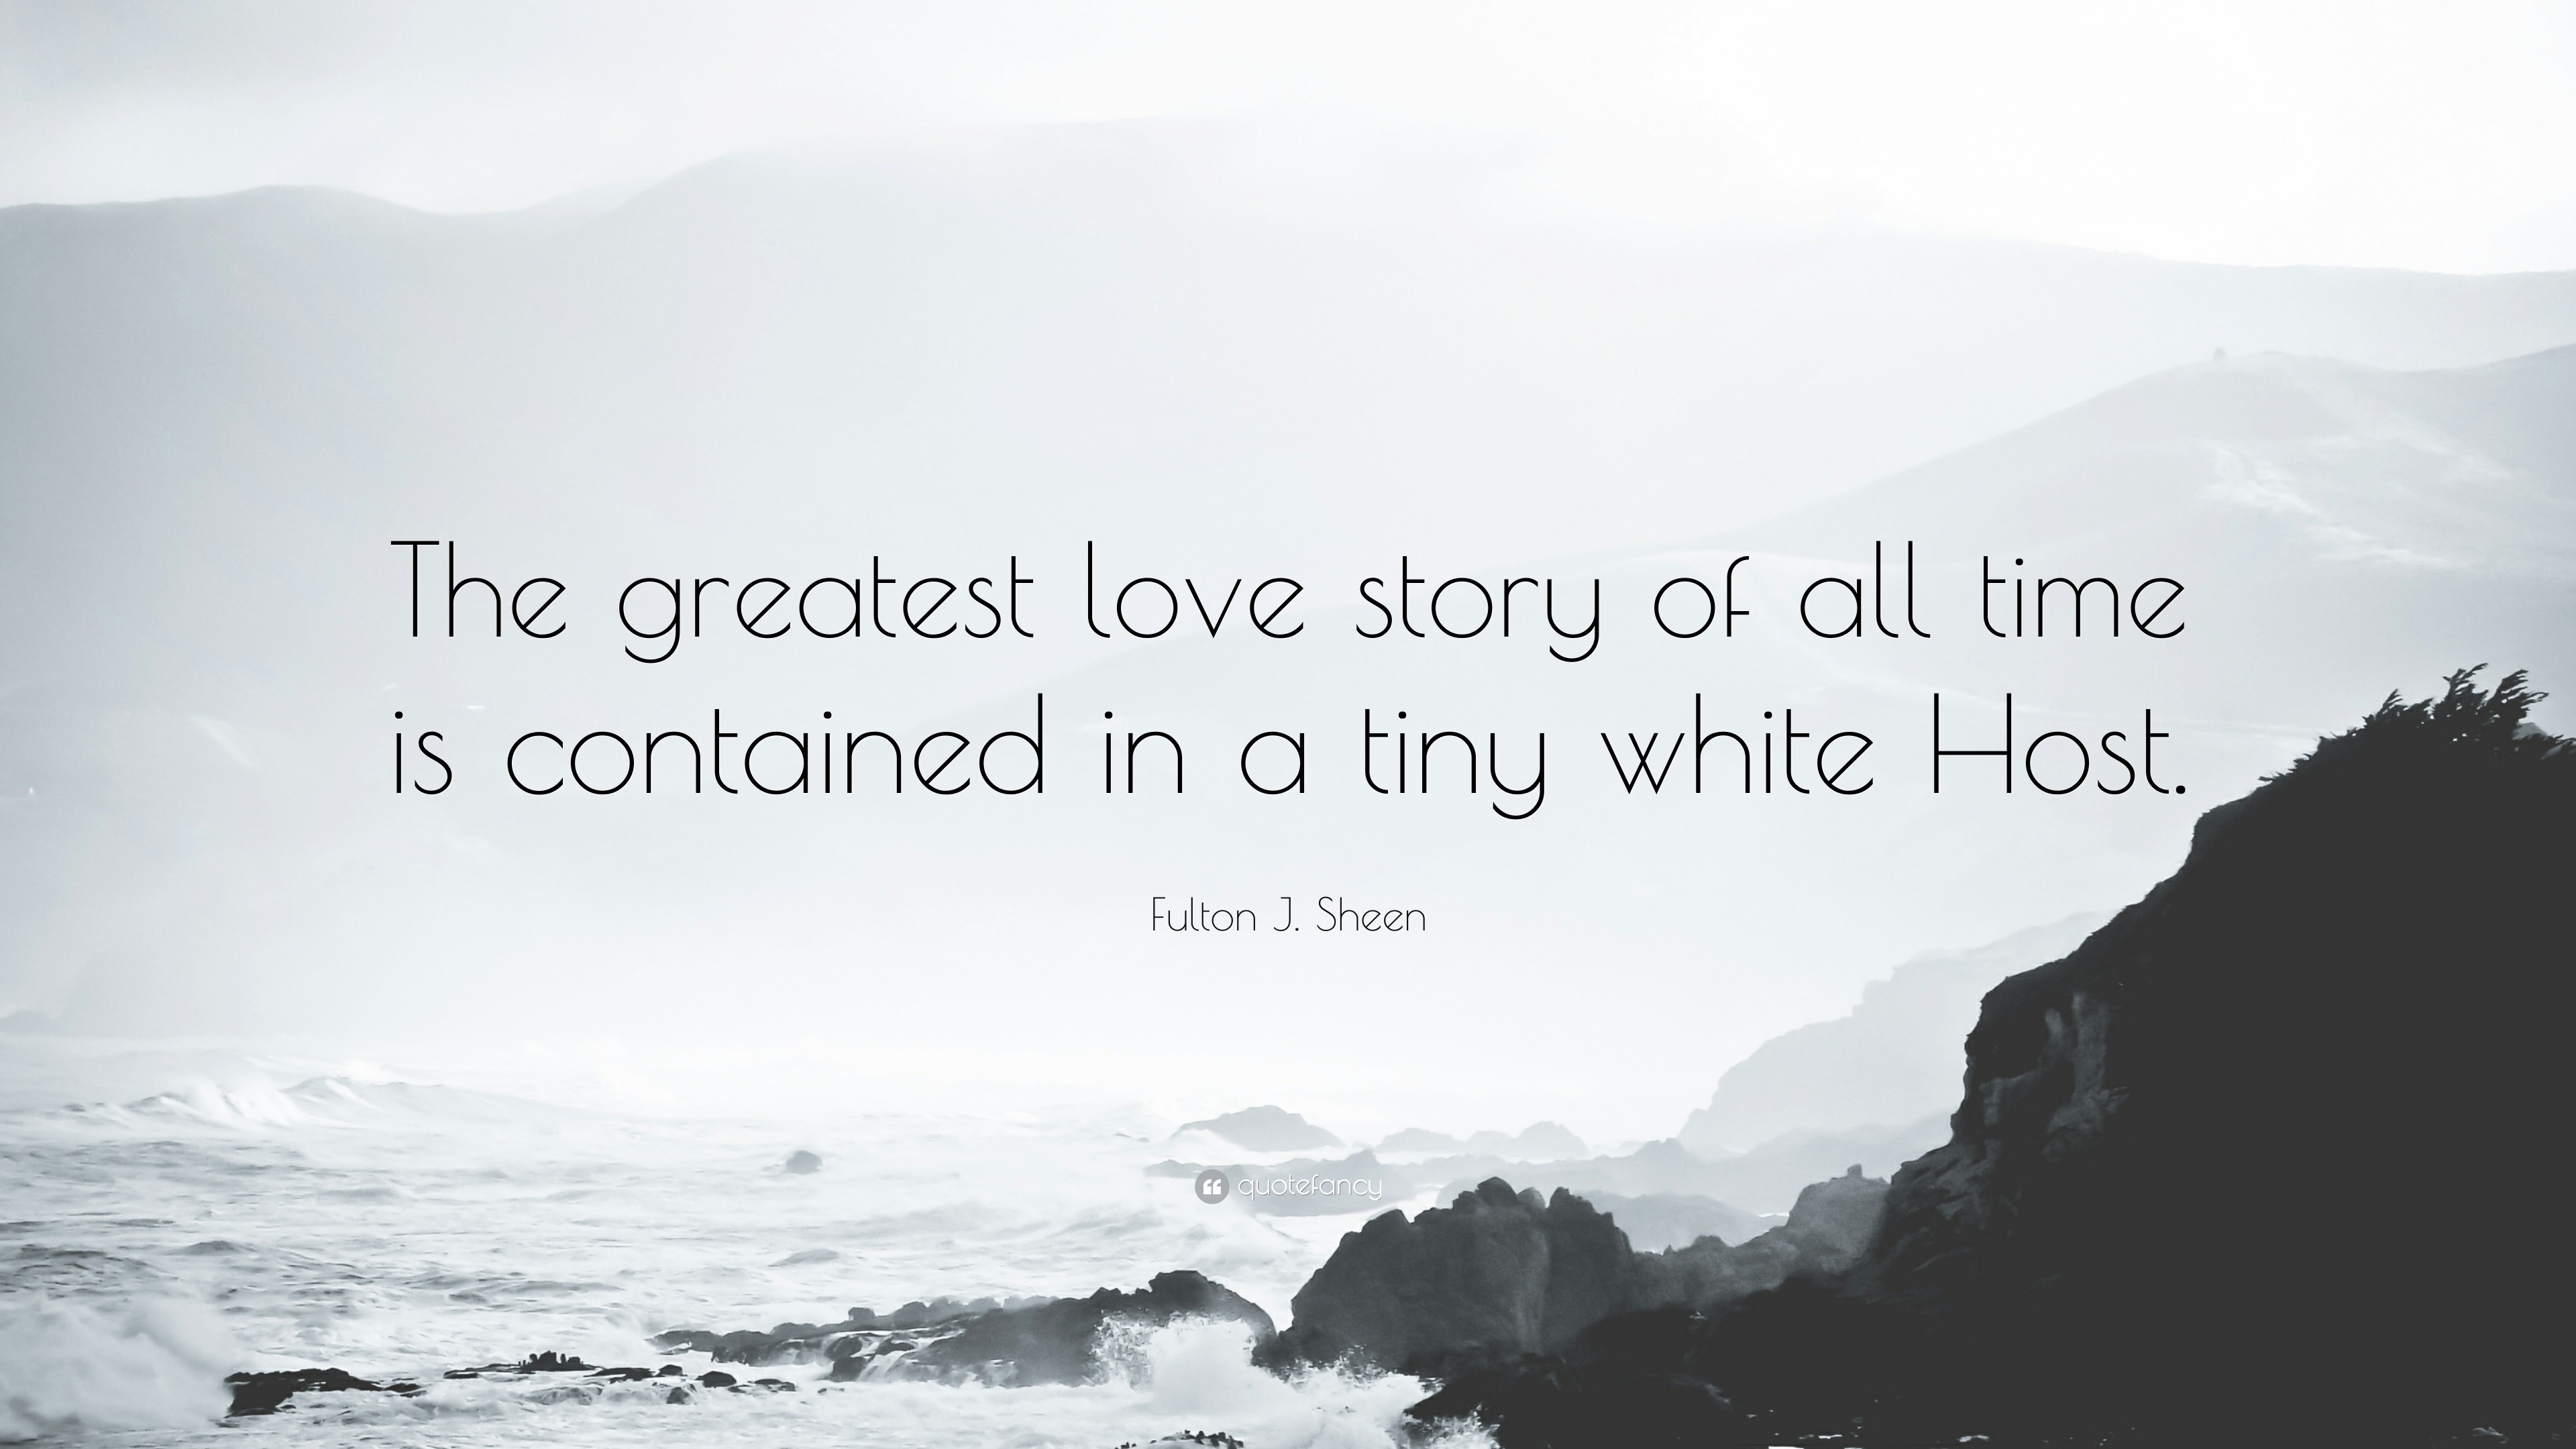 3840x2160 Fulton J. Sheen Quote: “The greatest love story of all time is contained